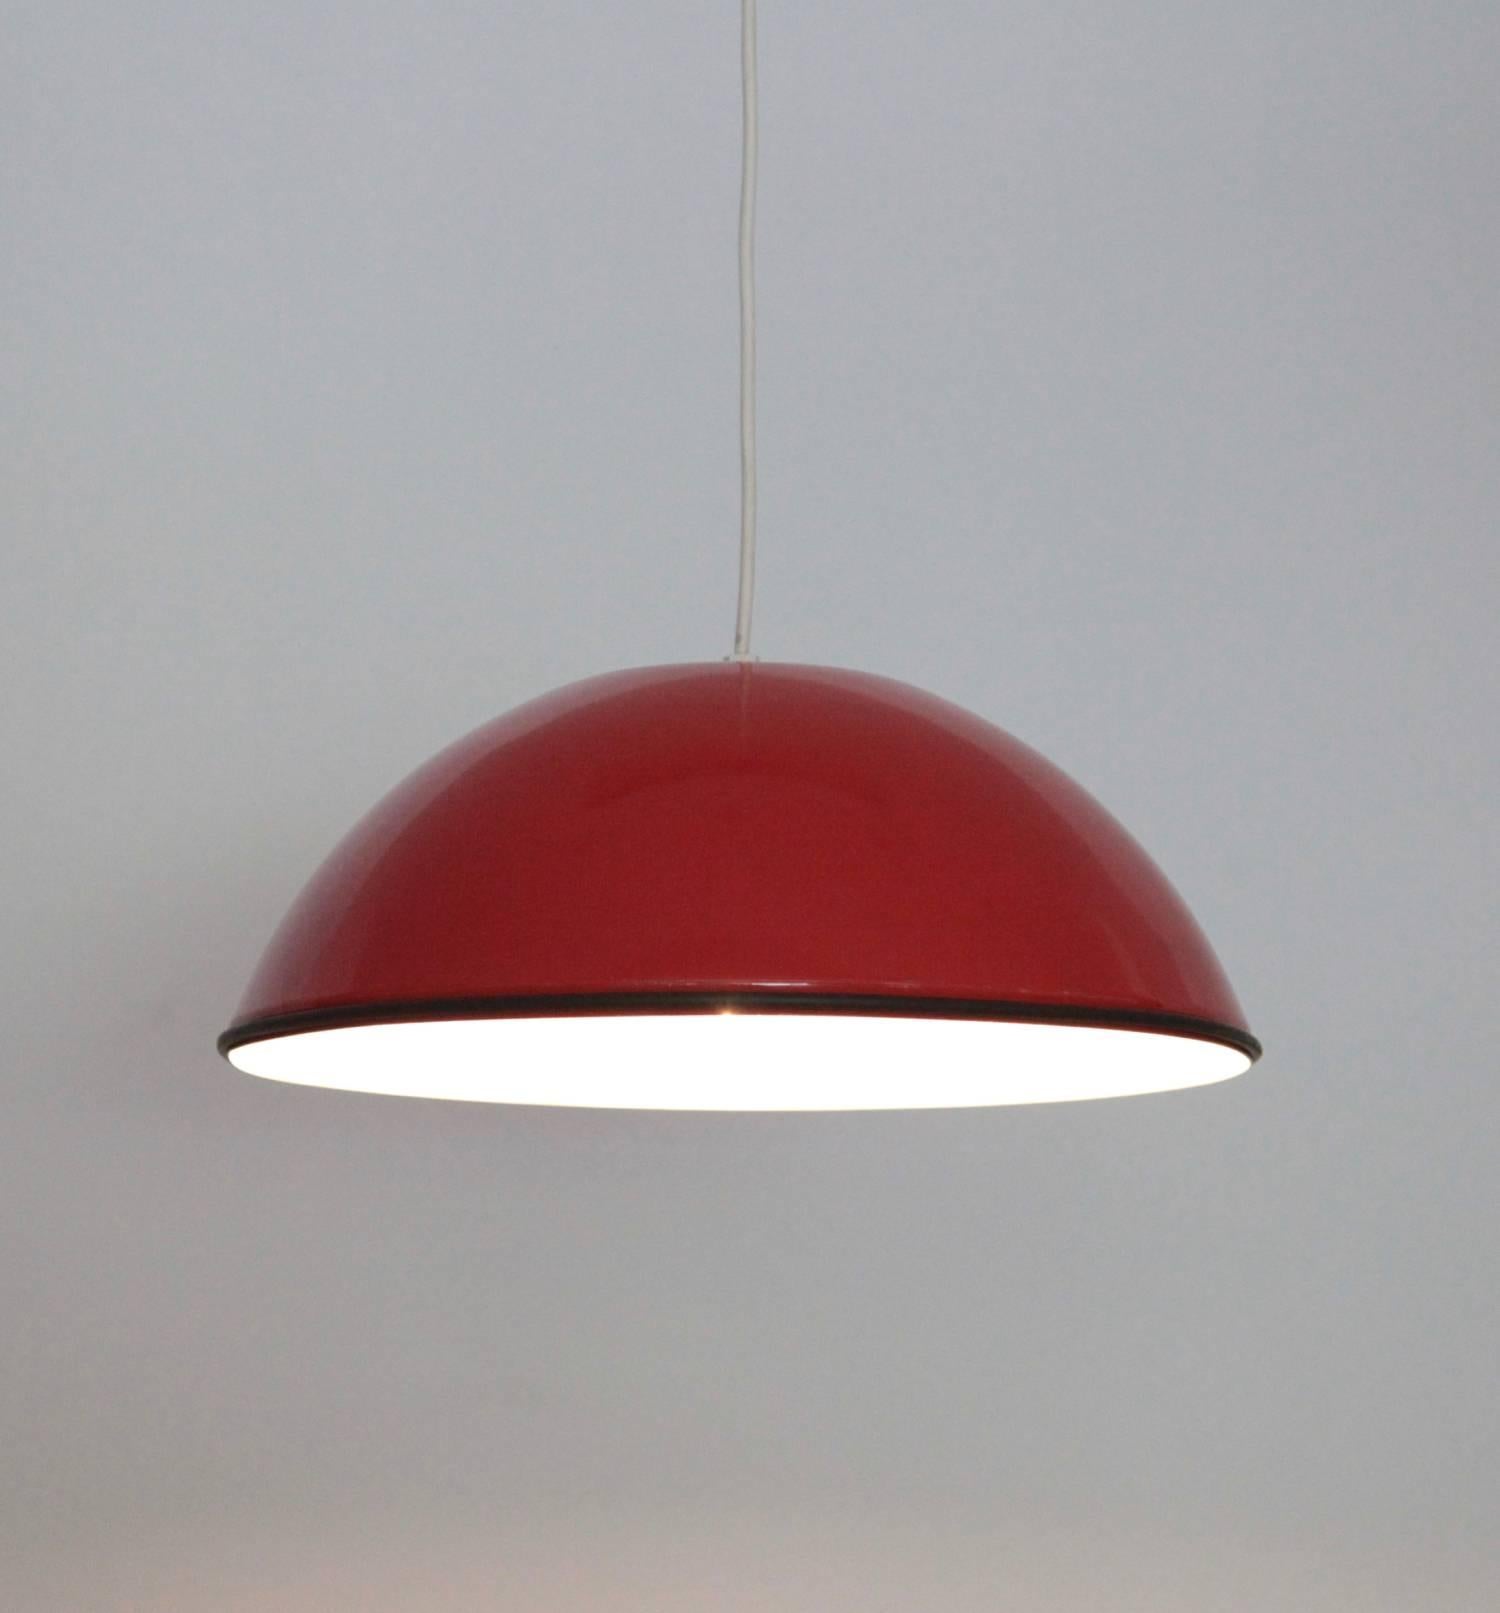 Italian Set of Three Castiglioni Release Pendant Lamps in Red for Flos, Italy, 1962